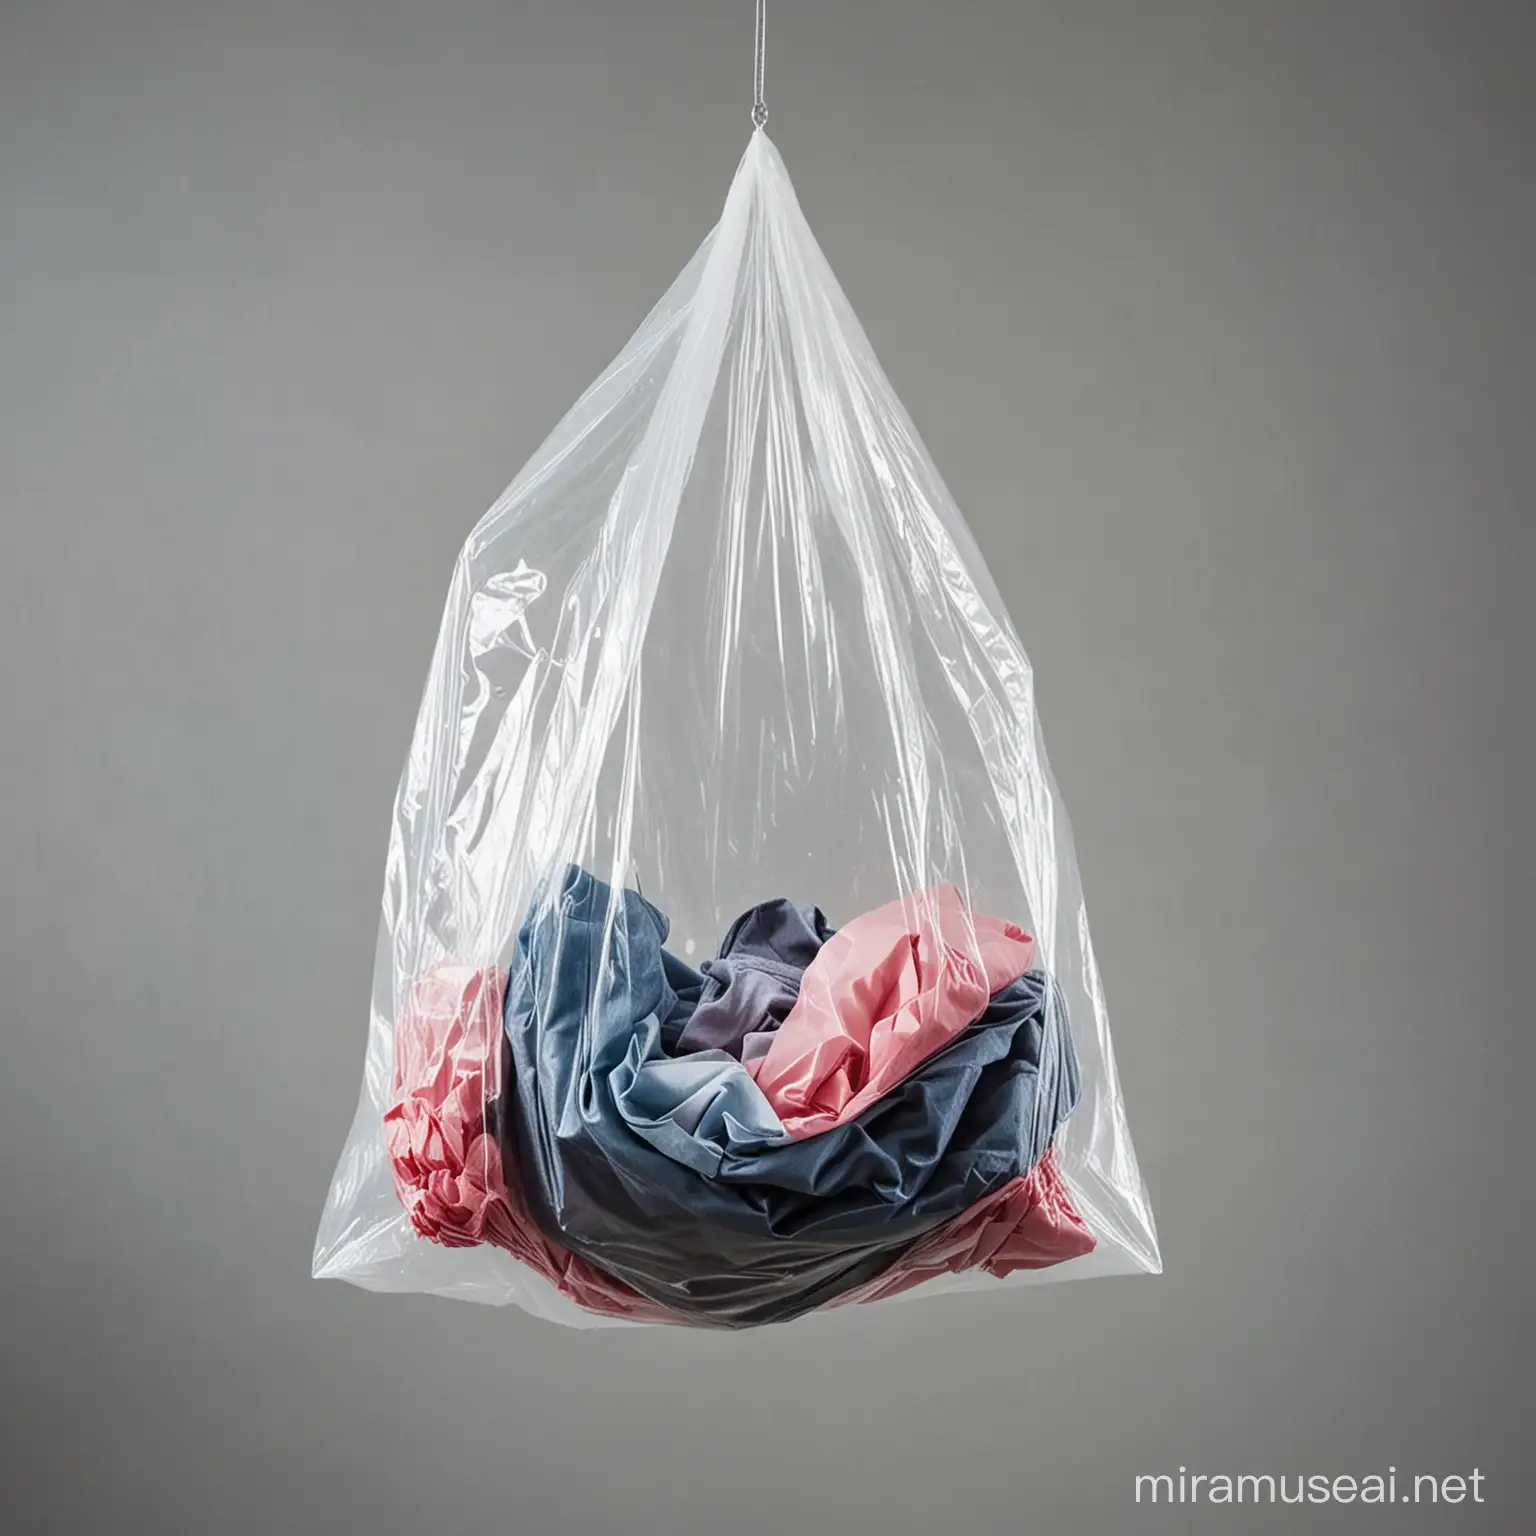 Colorful Floating Plastic Bag with Clothes